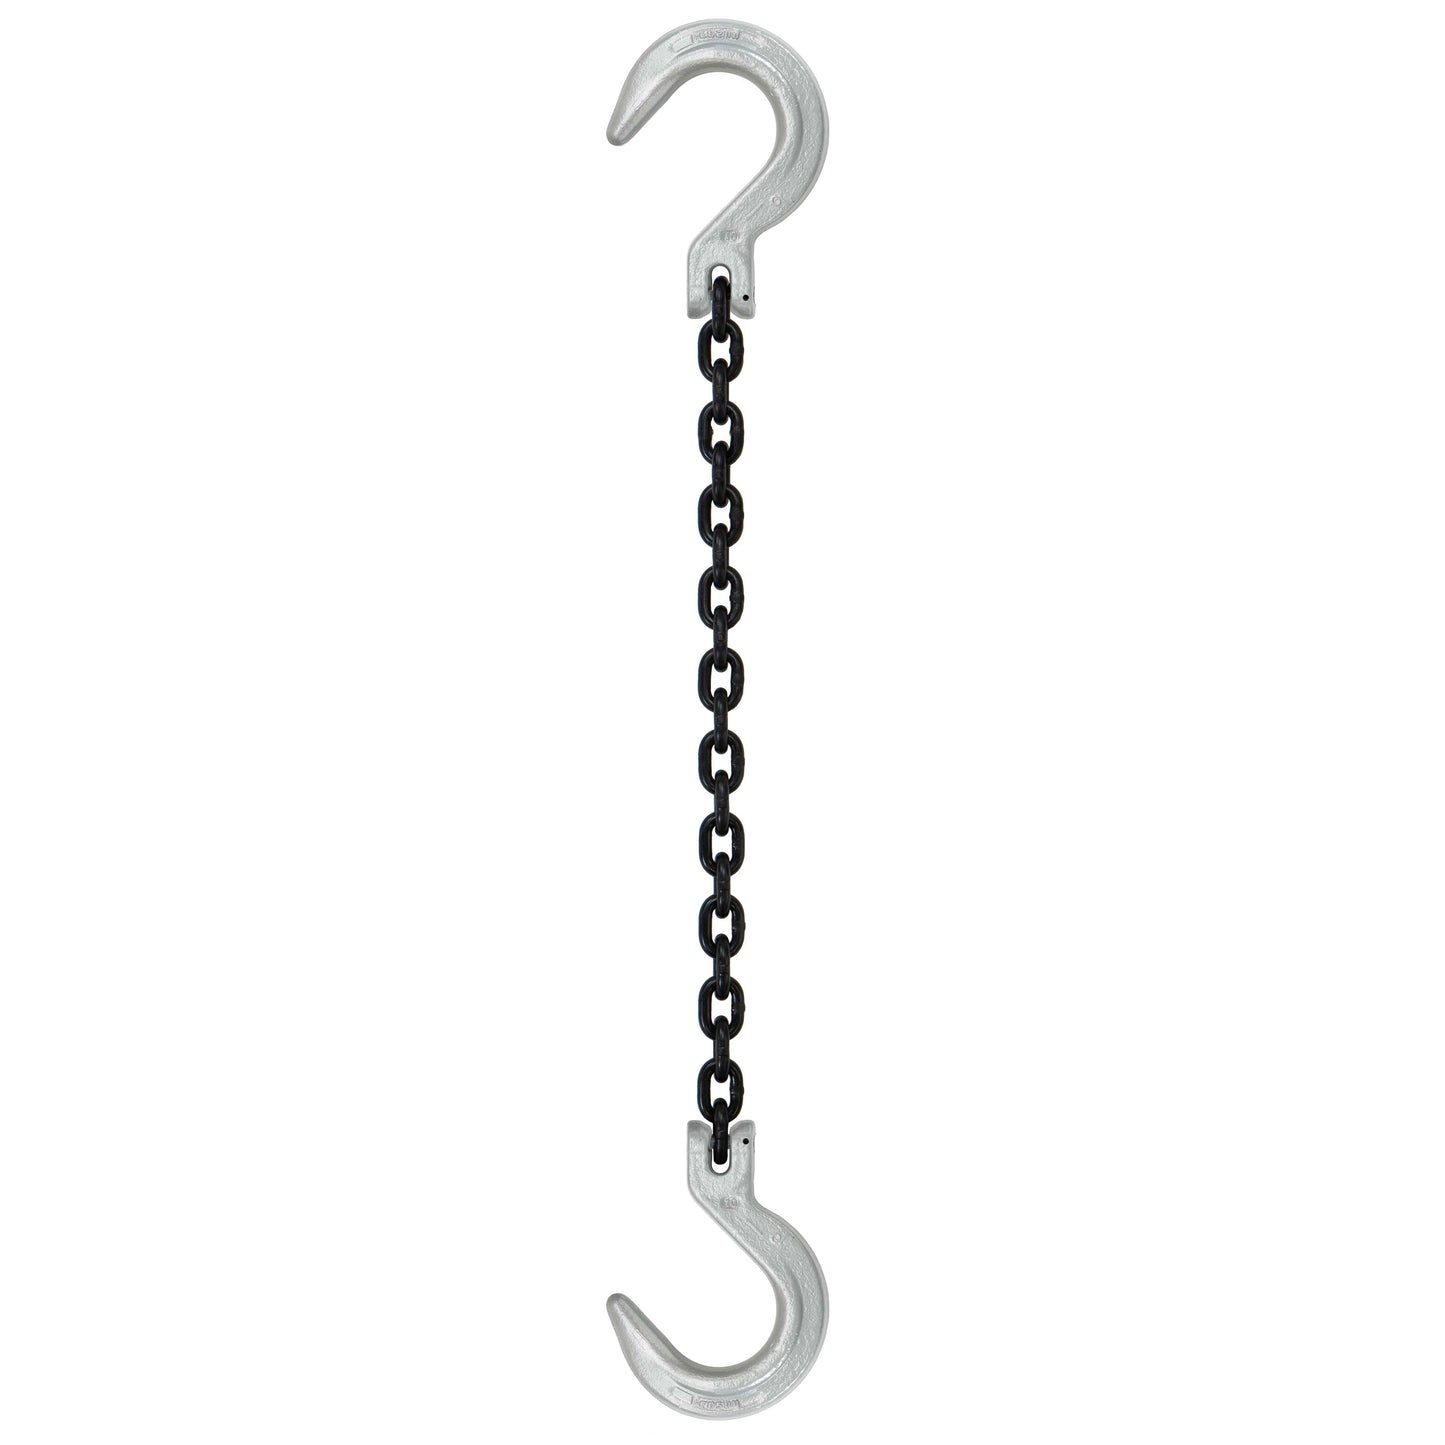 932 inch x 14 foot Domestic Single Leg Chain Sling w Crosby Foundry & Foundry Hooks Grade 100 image 1 of 2